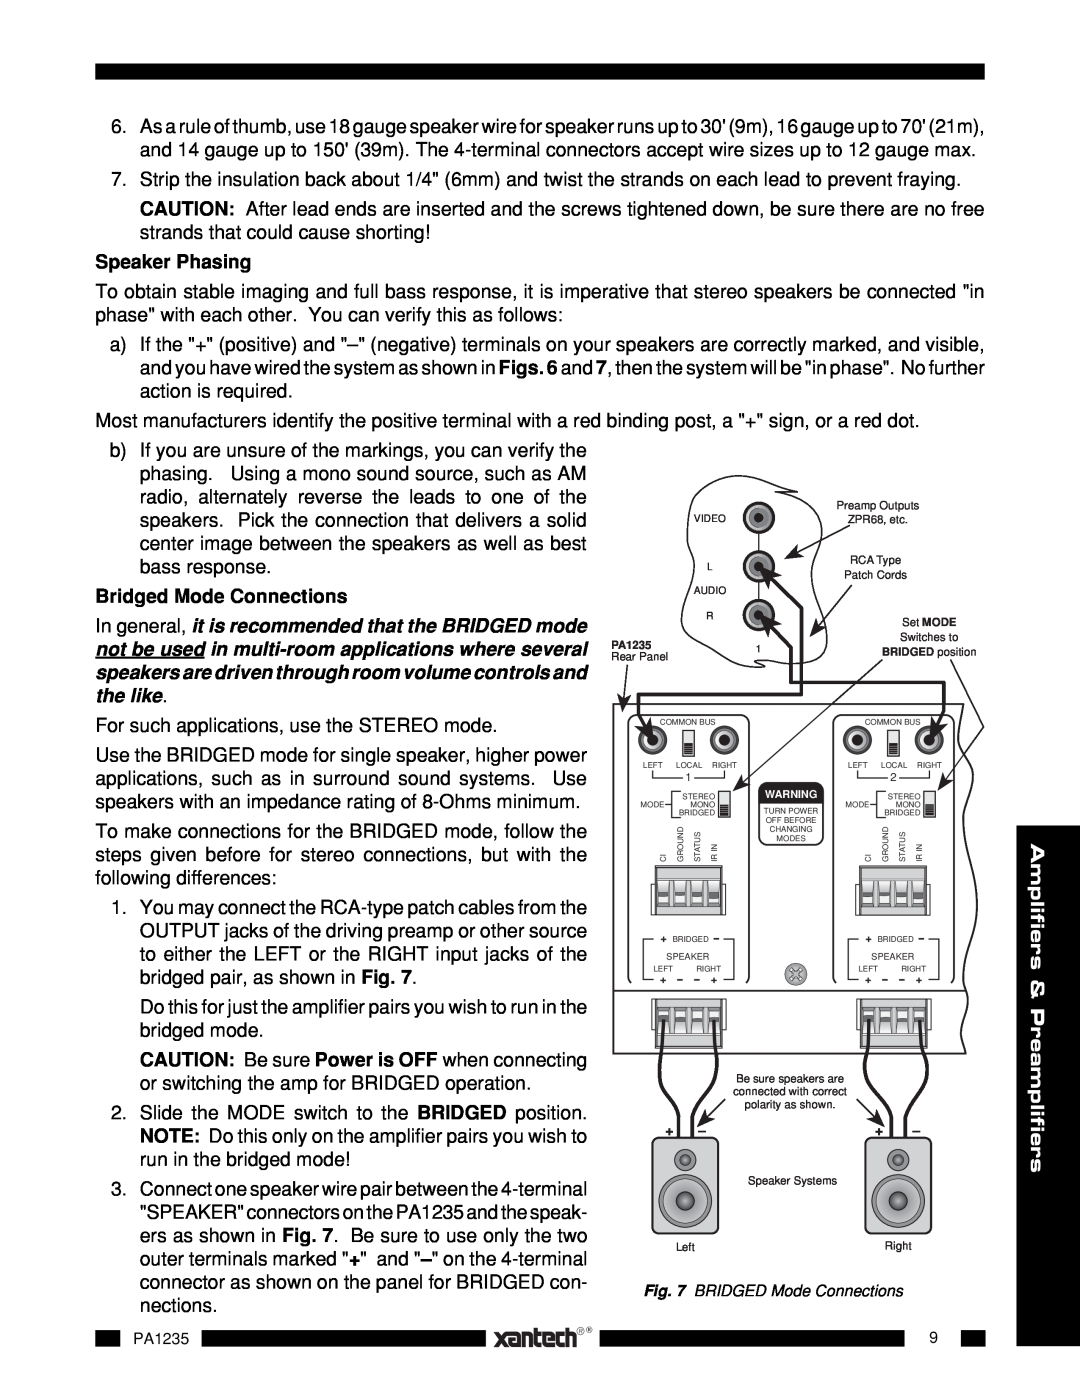 Xantech PA1235 installation instructions Speaker Phasing, Bridged Mode Connections 